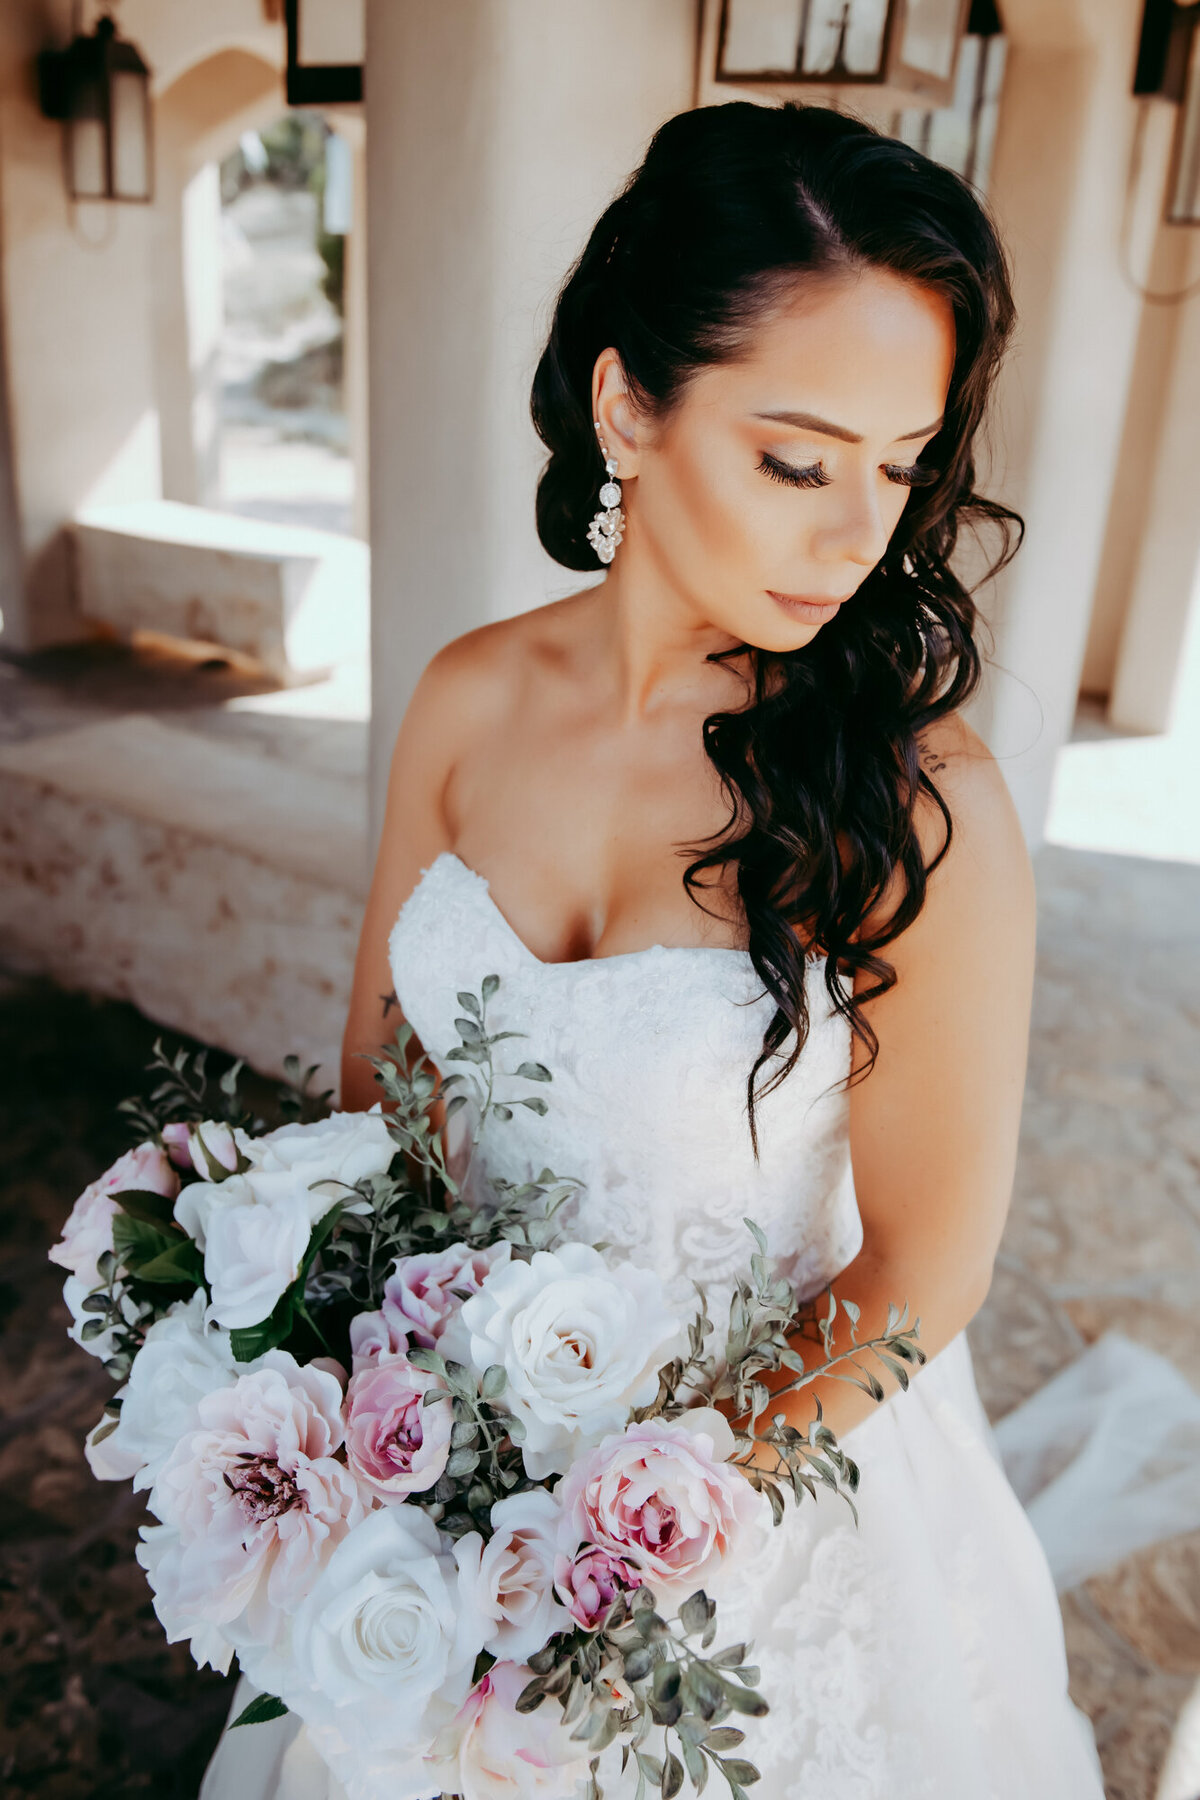 Couples Photography, bride in wedding dress holds bouquet of roses